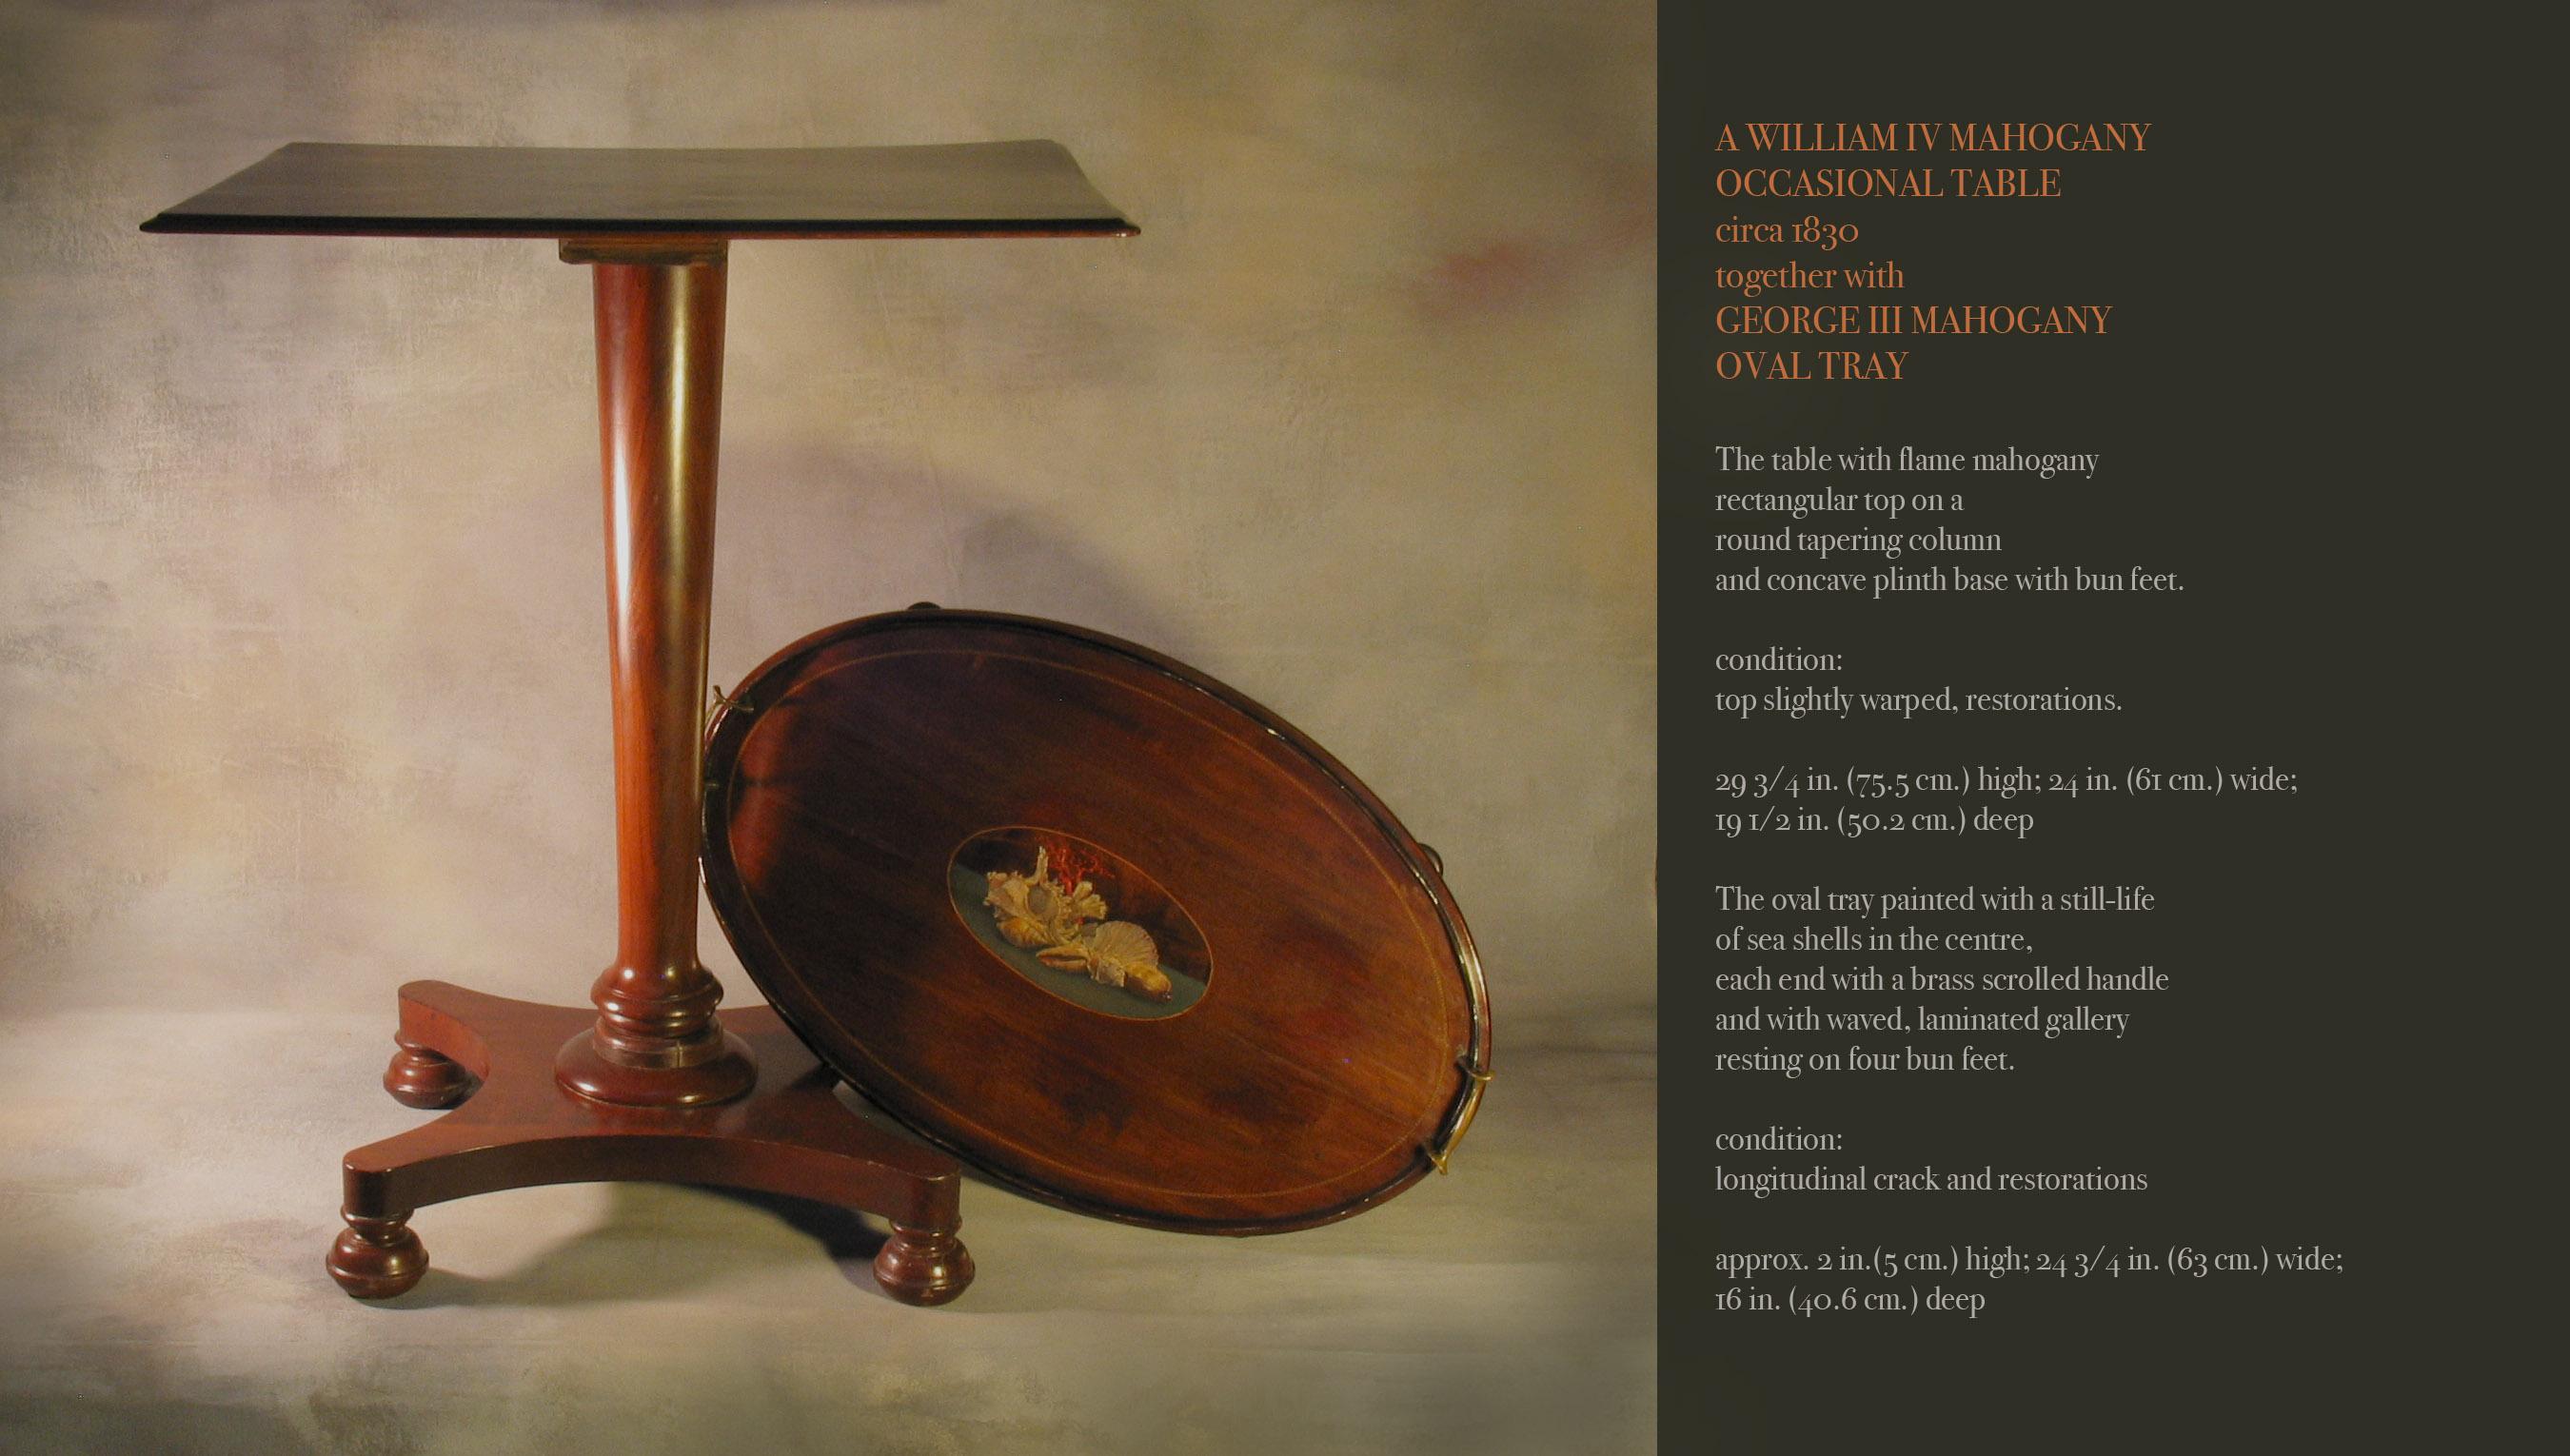 William IV Mahogany Occasional Table circa 1830 with George III Mahogany Tray For Sale 9